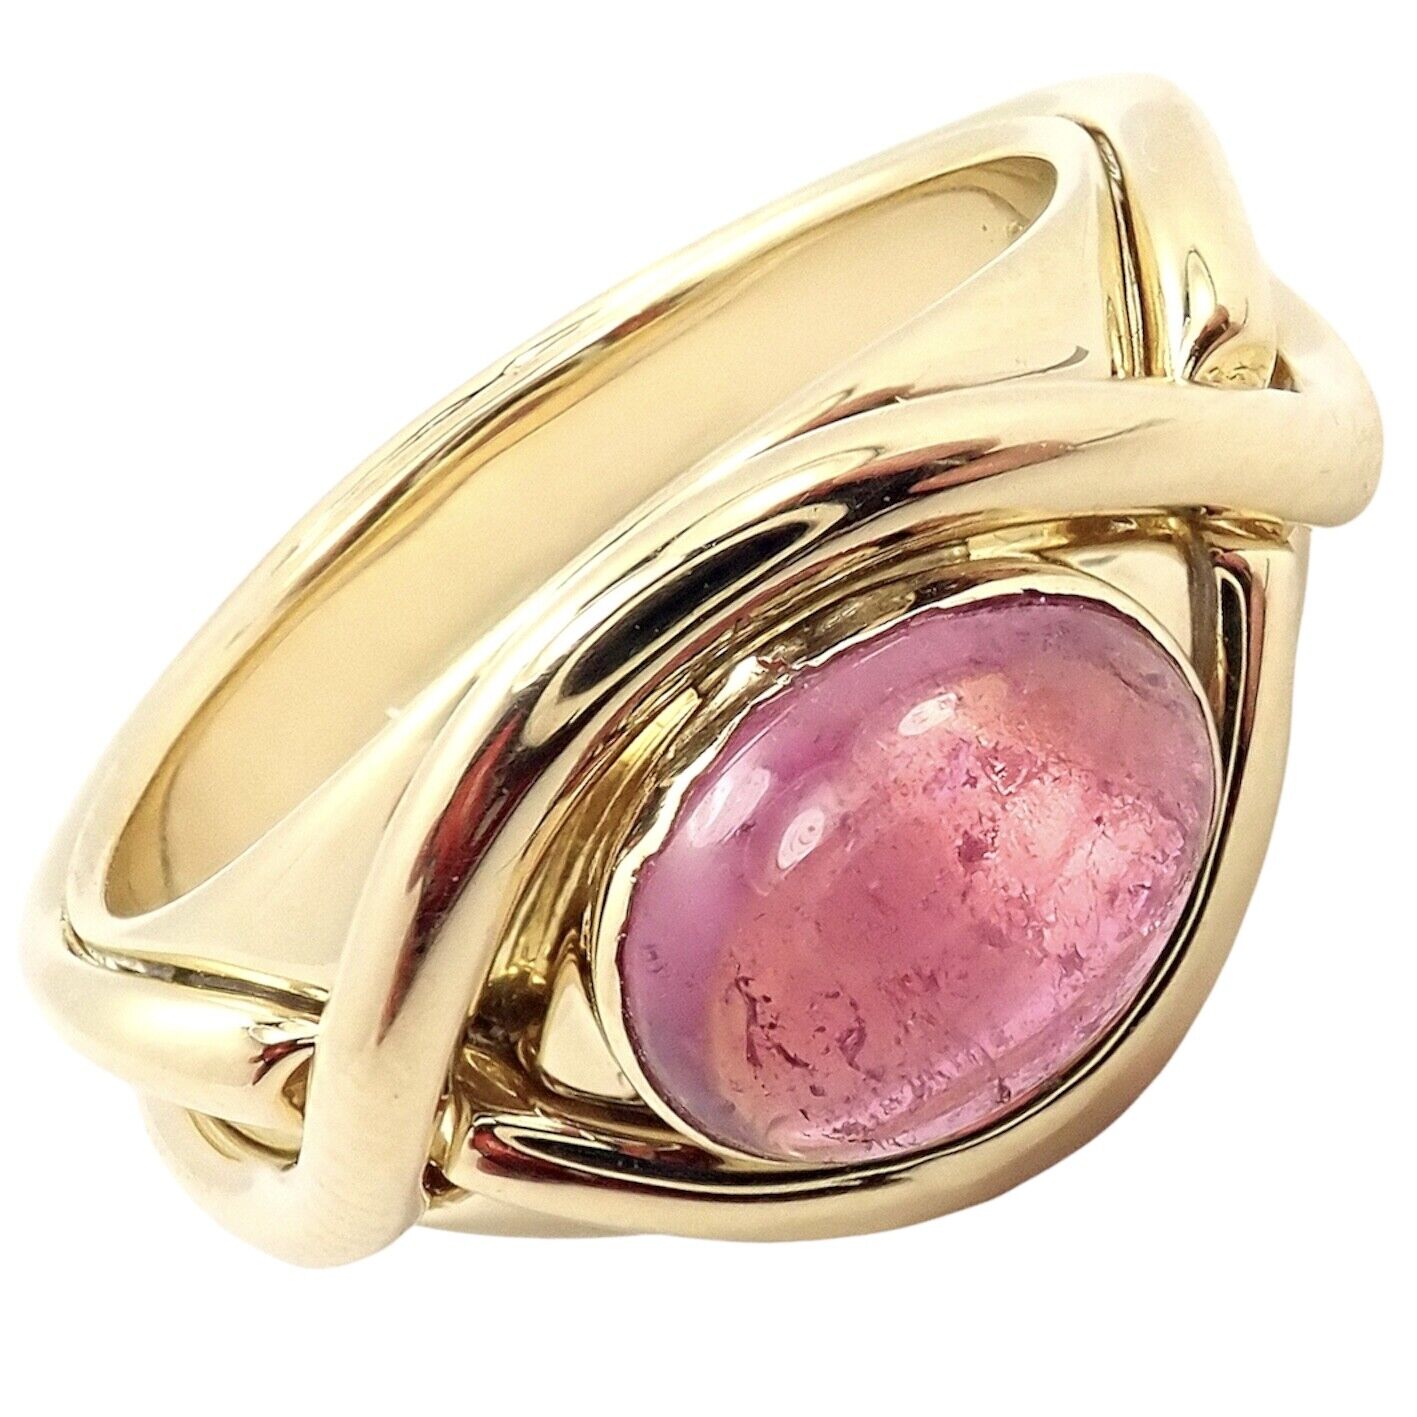 Rare! Authentic Tiffany & Co 18K Yellow Gold Pink Tourmaline Cabochon Band Ring